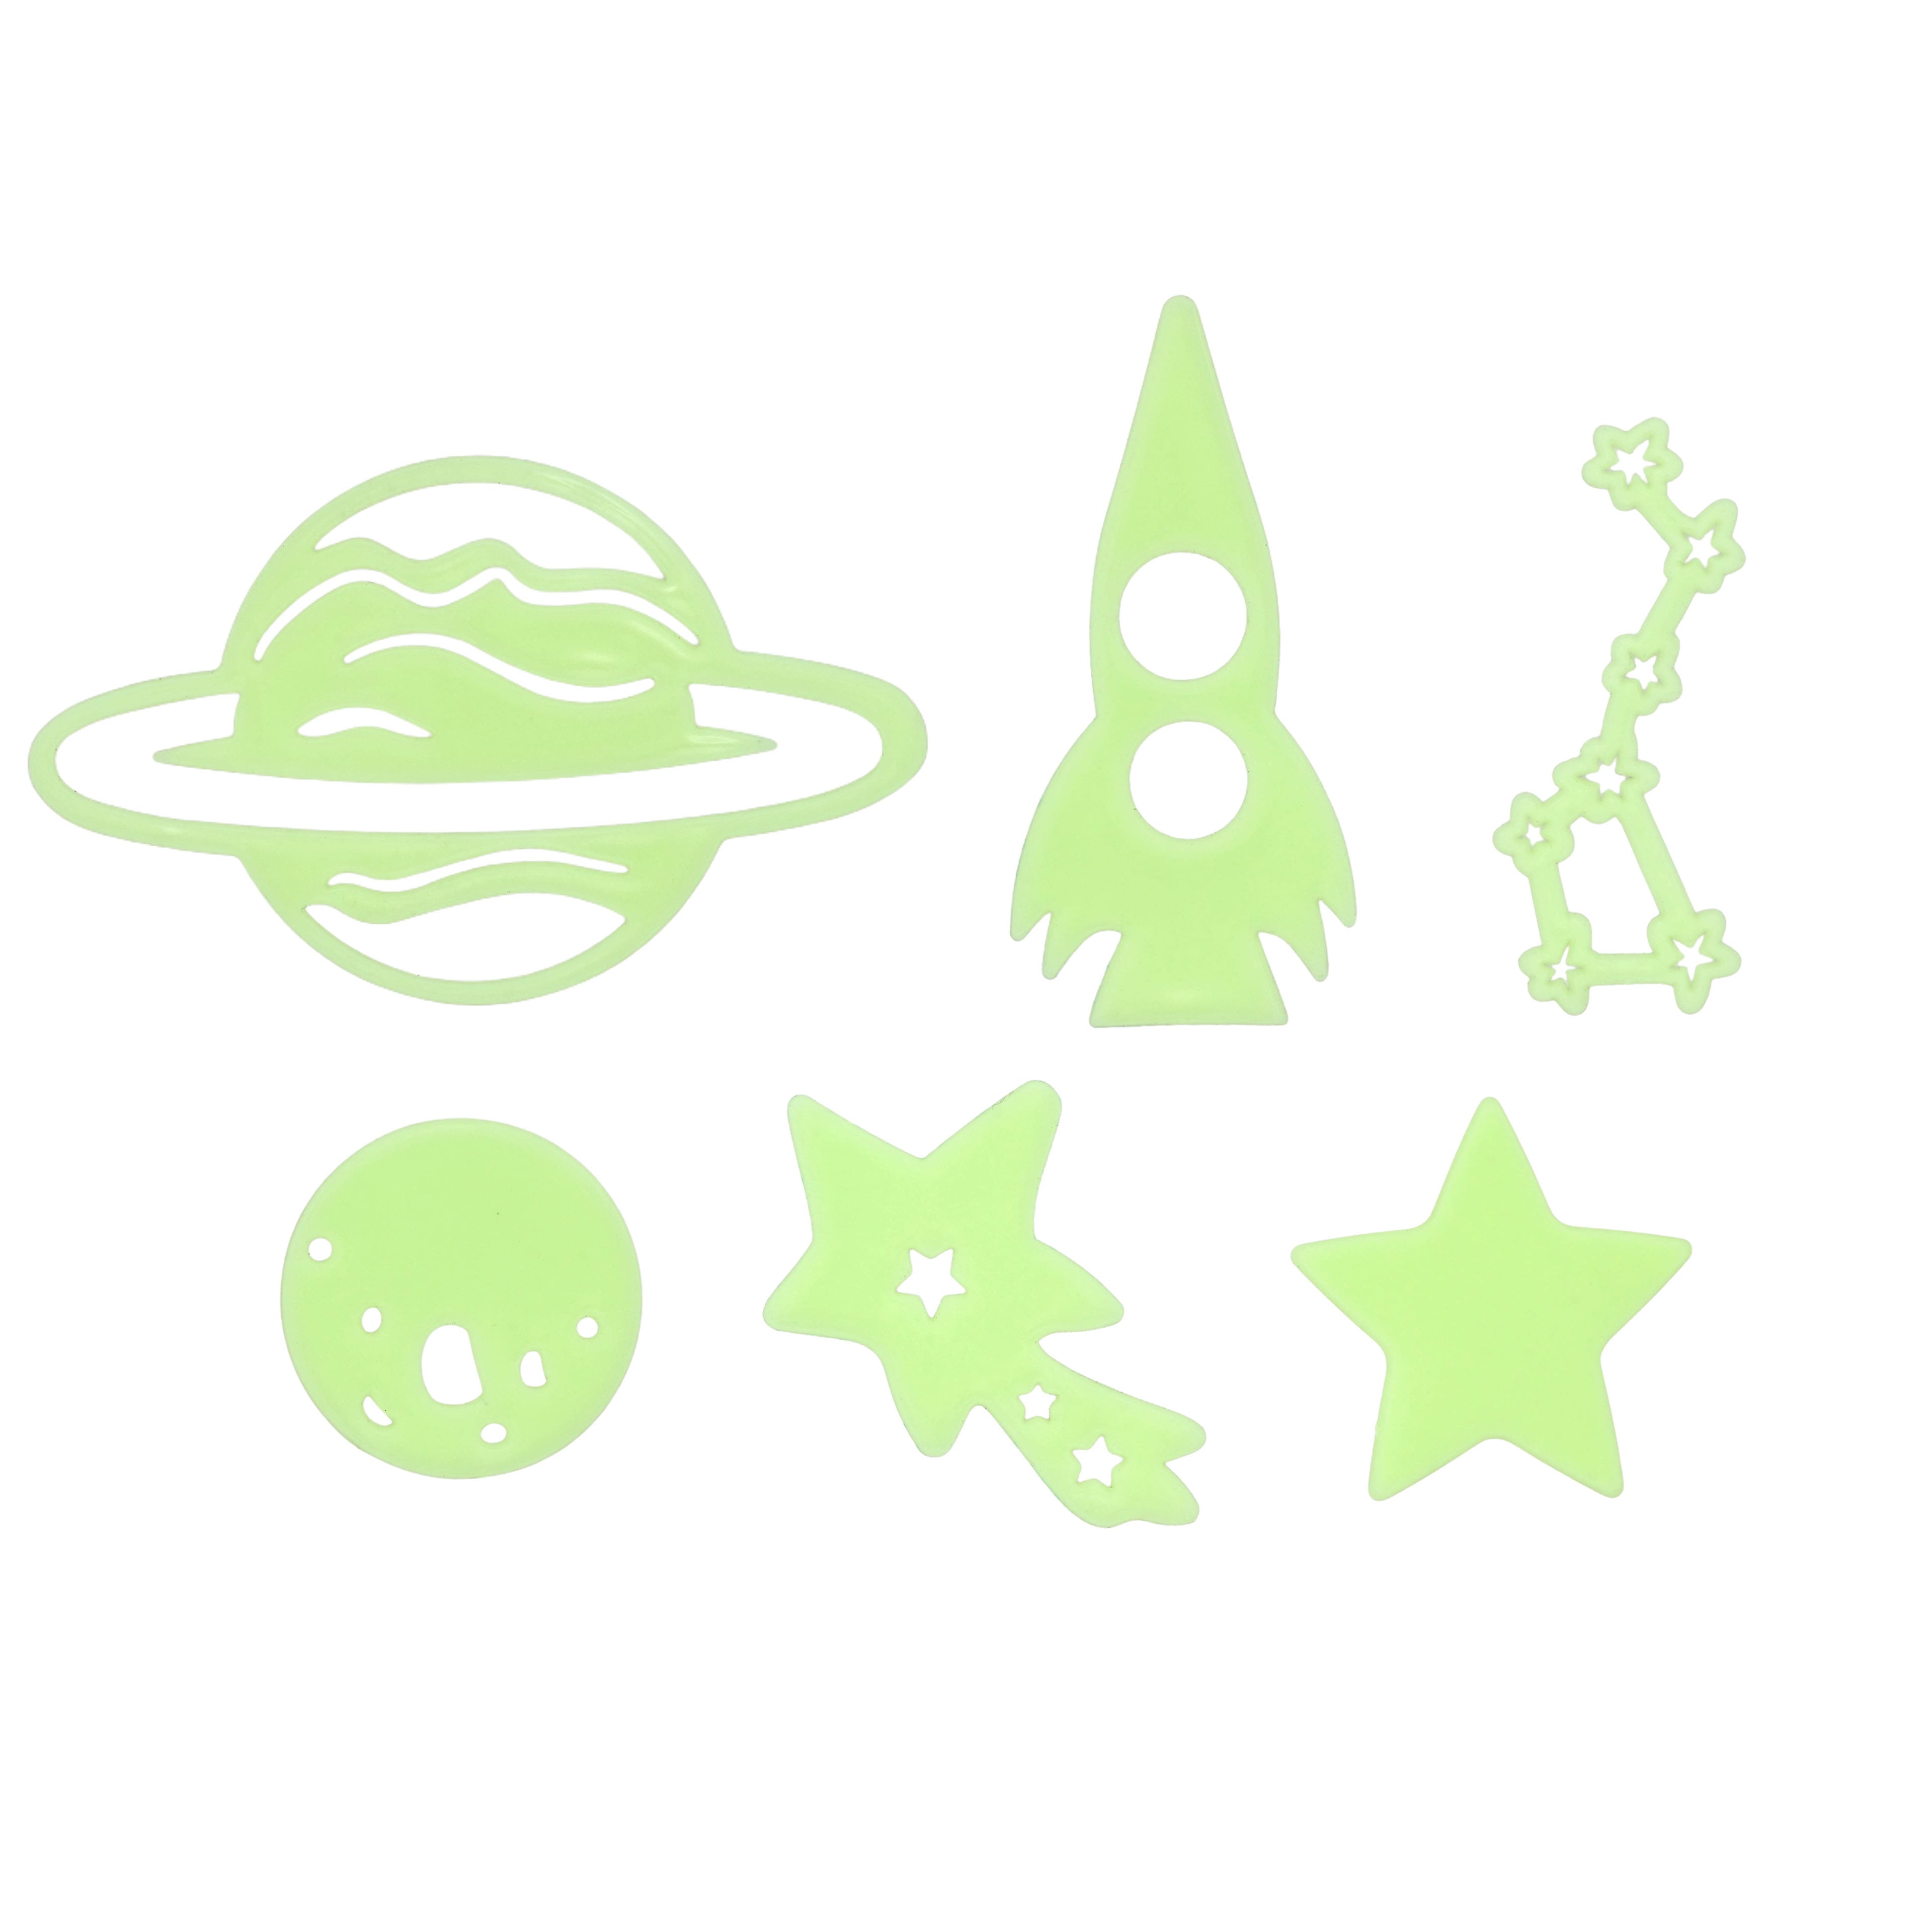 Space Glow-in-the-Dark Stickers by Creatology&#x2122;